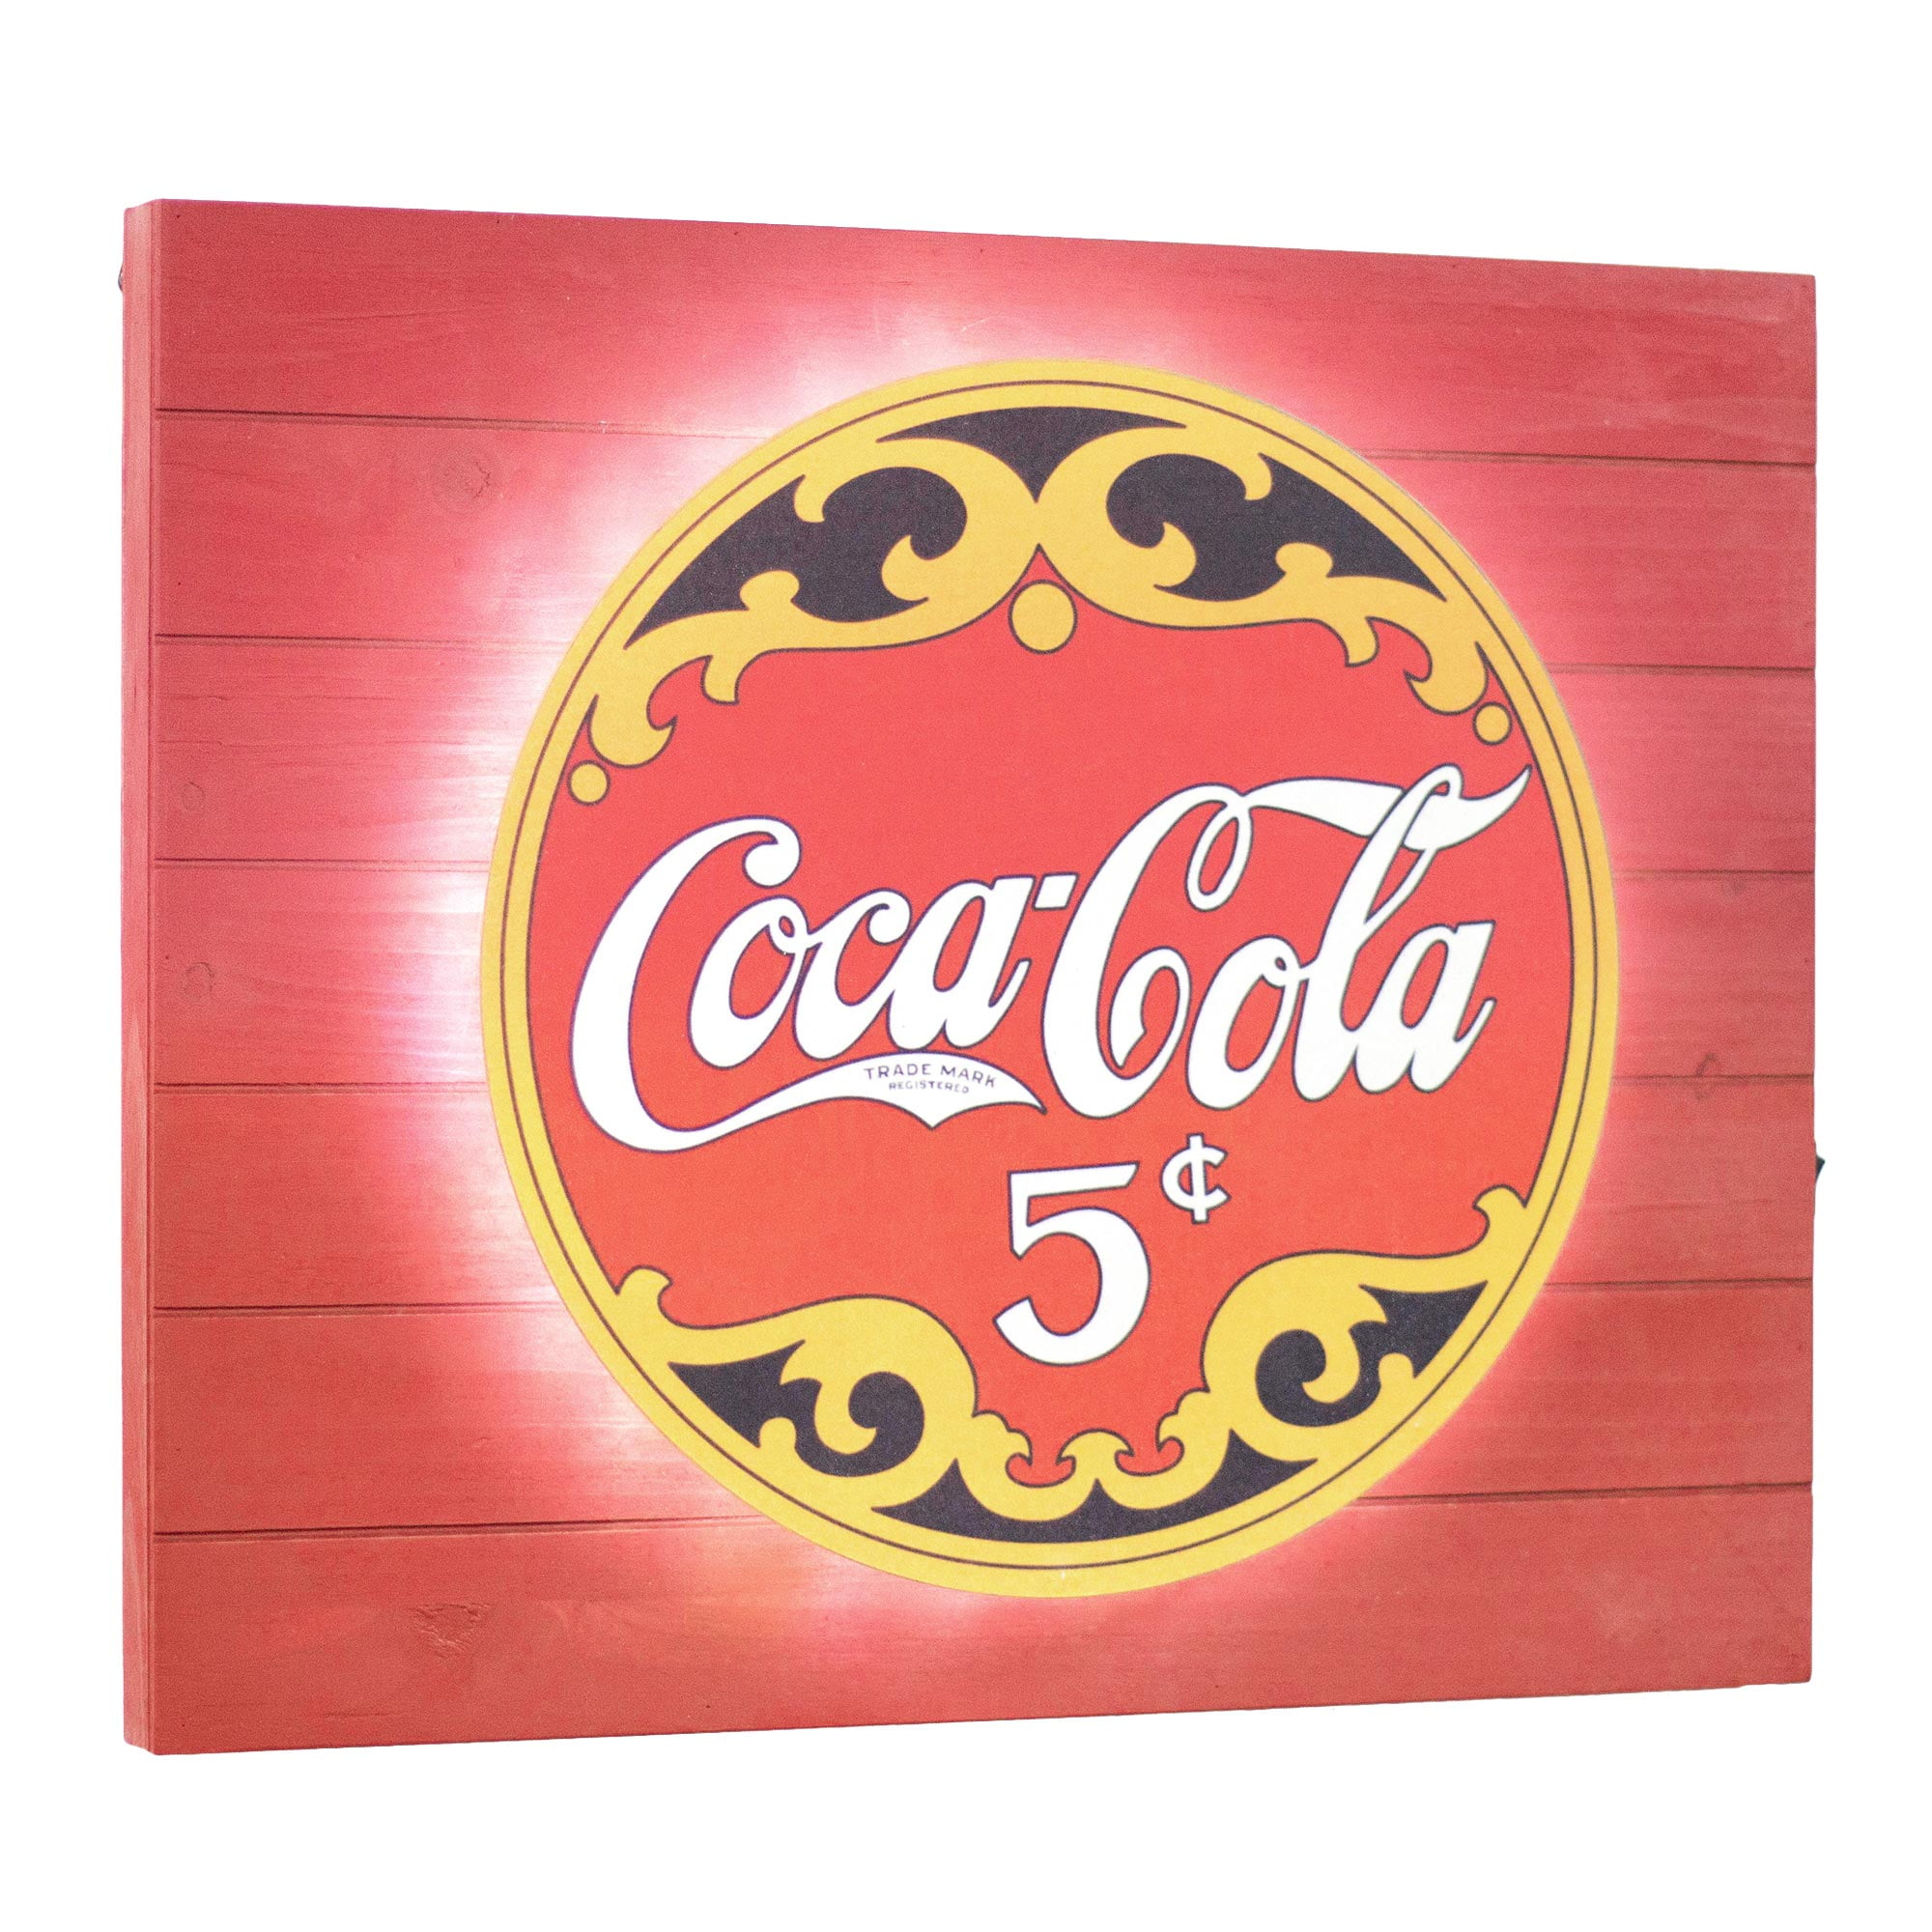 Vintage Style 12" Coca Cola Gas Station Signs Man Cave Garage Decor Oil Can 